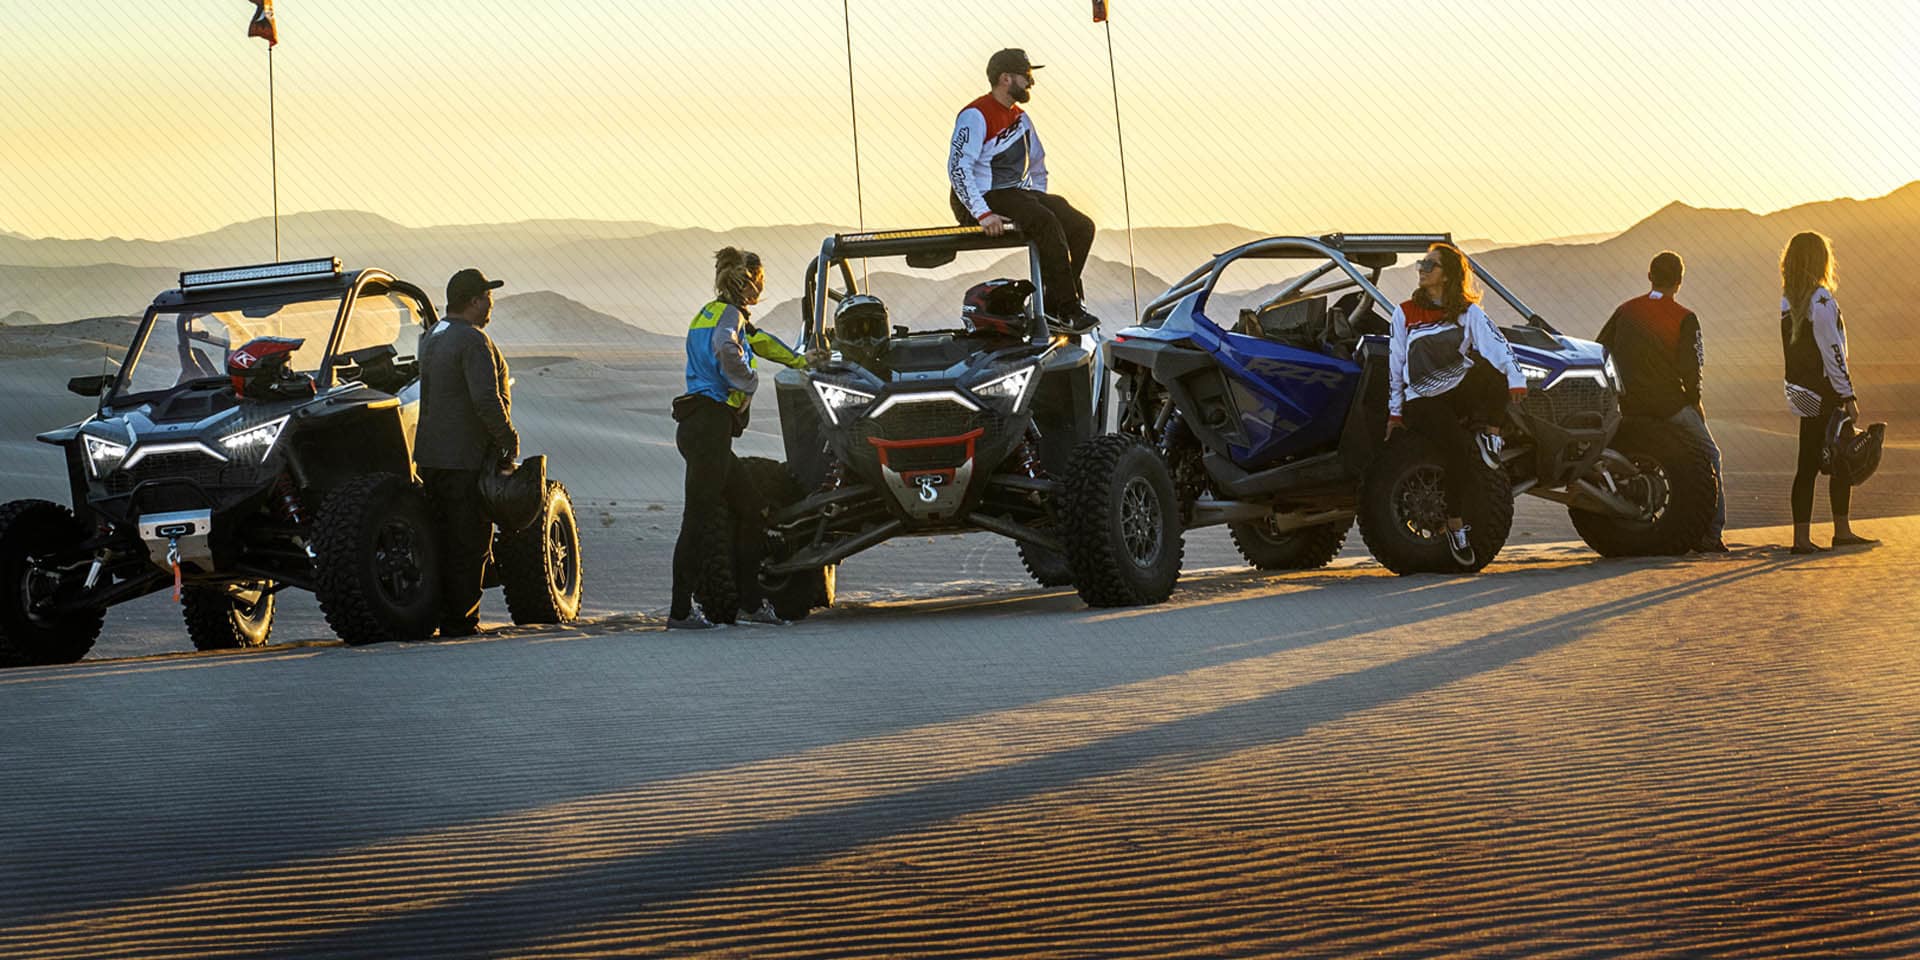 A group of side by side riders gather around their vehicles in a sandy area at sunset.